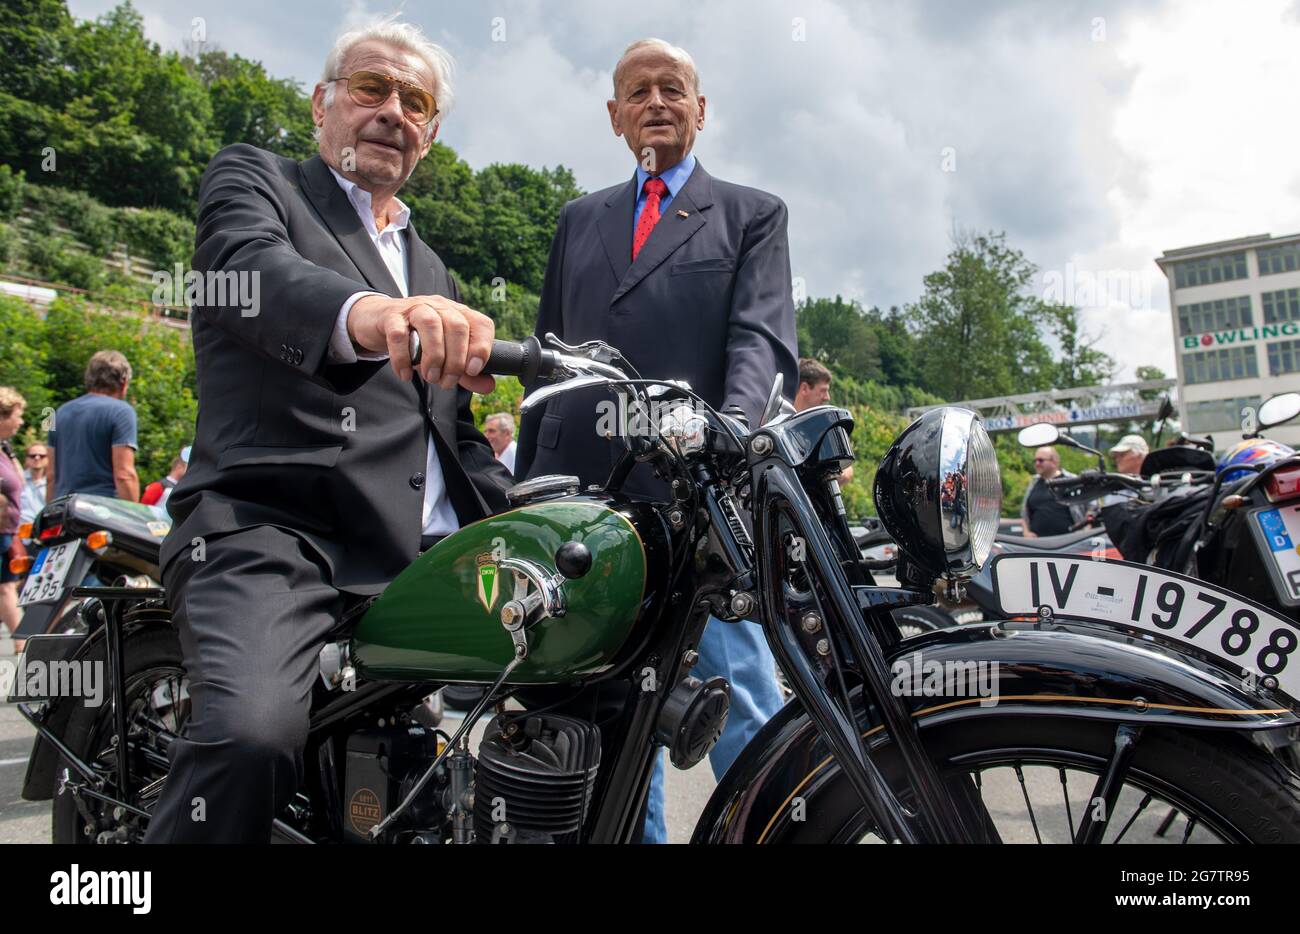 Zschopau, Germany. July 16 2021: Jörgen S. Rasmussen (l), grandson of the eponymous founder of the Zschopau engine works, sits next to Carl Hahn, former Chairman of the Board of Management of Volkswagen, on a 1936 DKW SB 200 in front of the former DKW and MZ motorcycle plant in Zschopau. Both guests of honour watched the awarding of the name 'Motorcycle City' to Zschopau. Flanked in style by hundreds of two-wheelers, mainly from DKW and MZ production, the town was now awarded the title. Motorcycles were built in the Saxon town between 1922 and 2016. Credit: dpa picture alliance/Alamy Live News Stock Photo